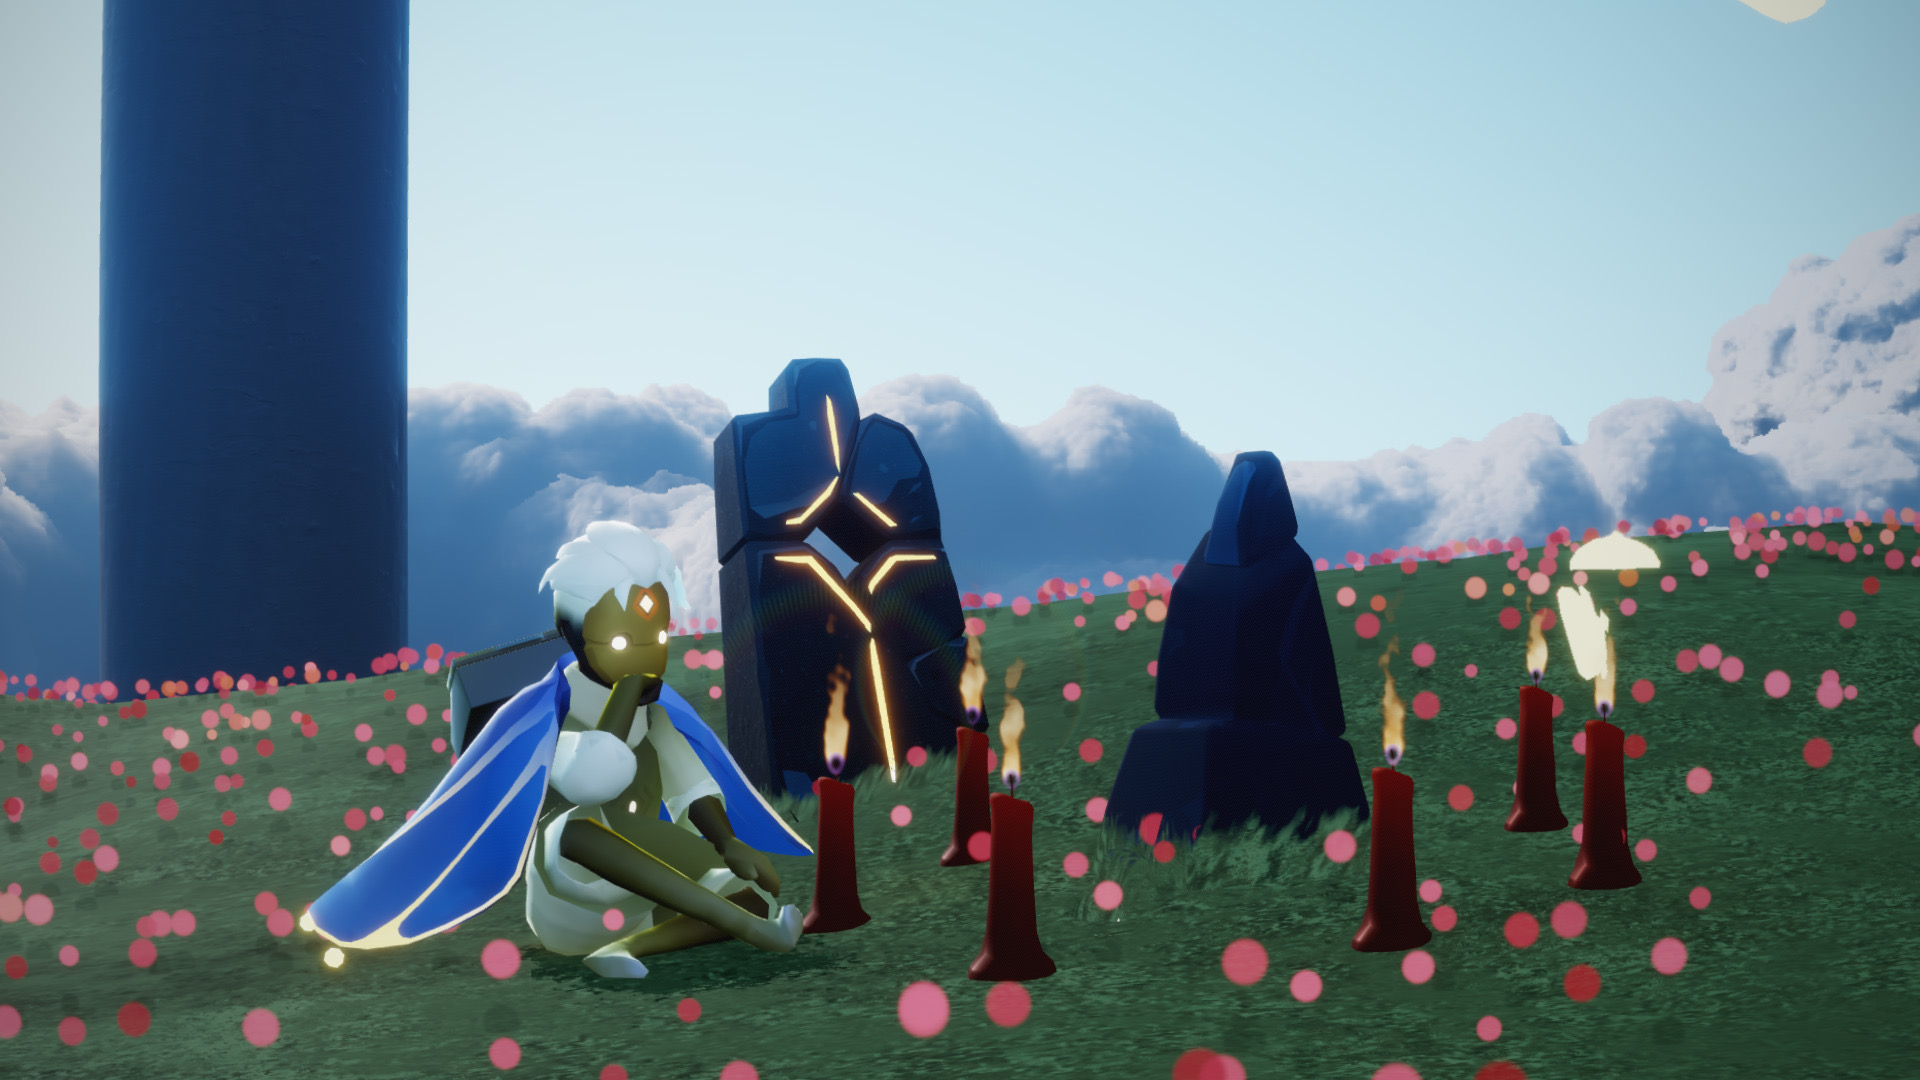 A lonely player awaits help by an eight-person puzzle.